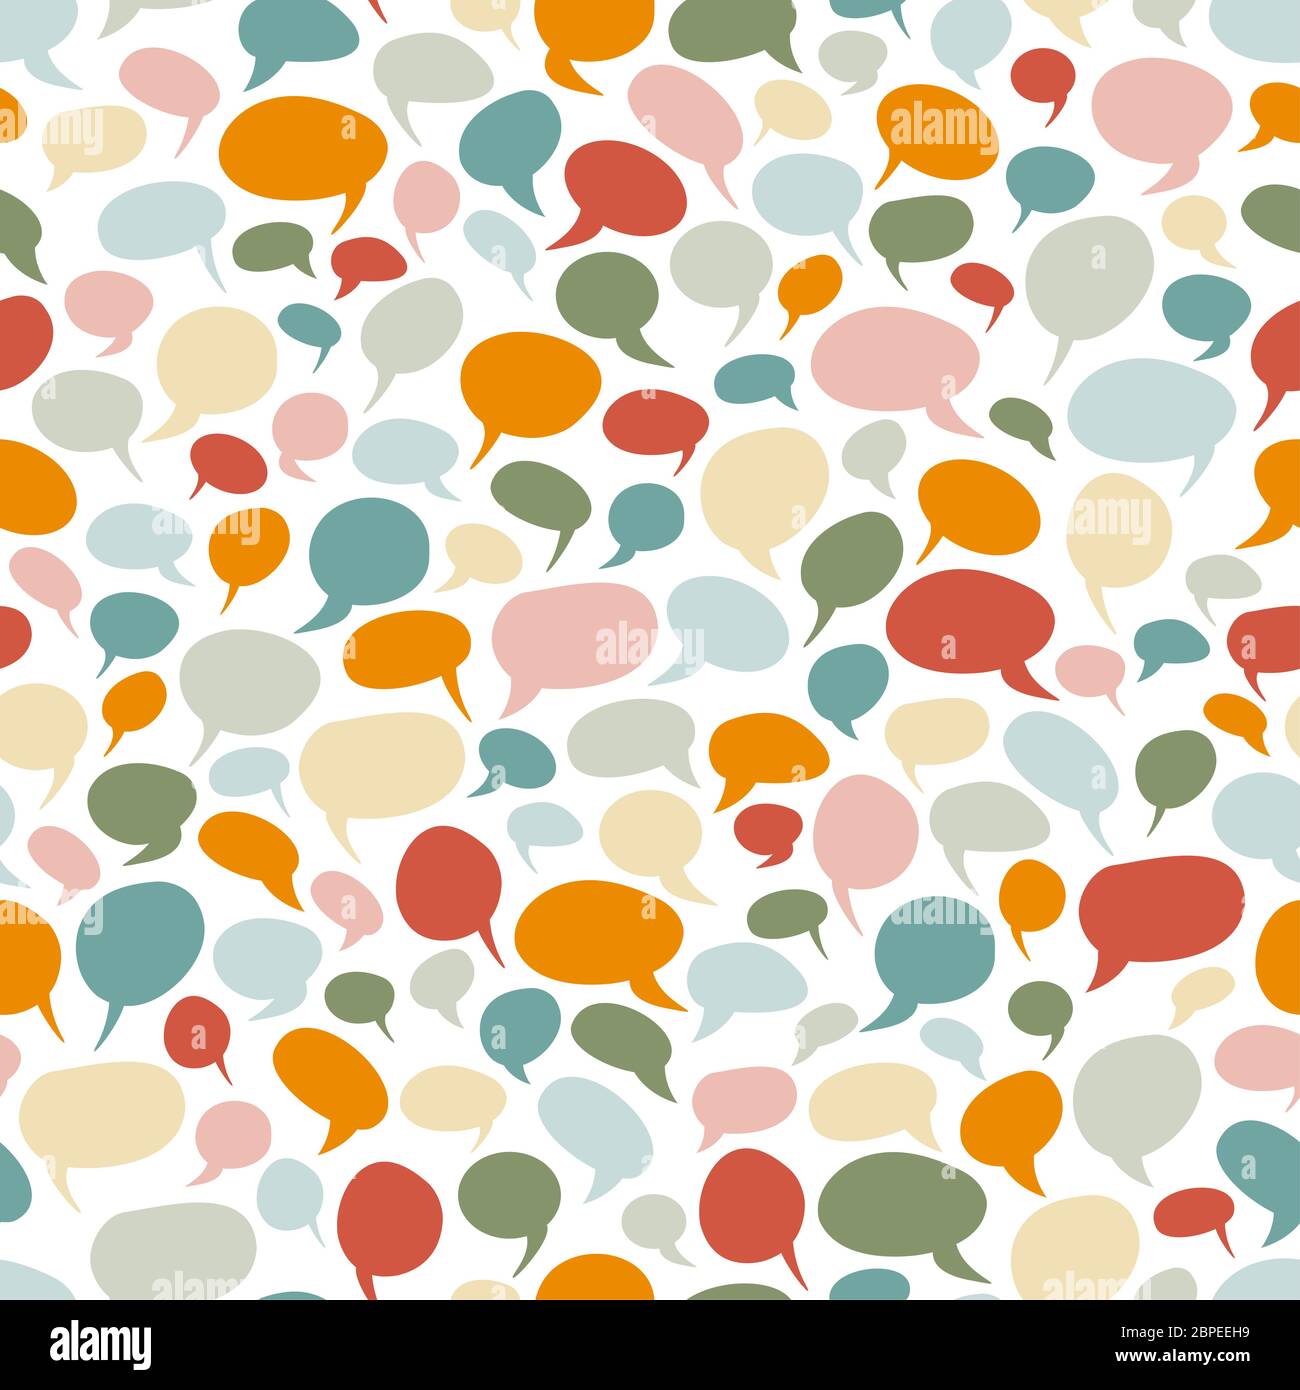 seamless speech bubbles background in fine colors Stock Photo